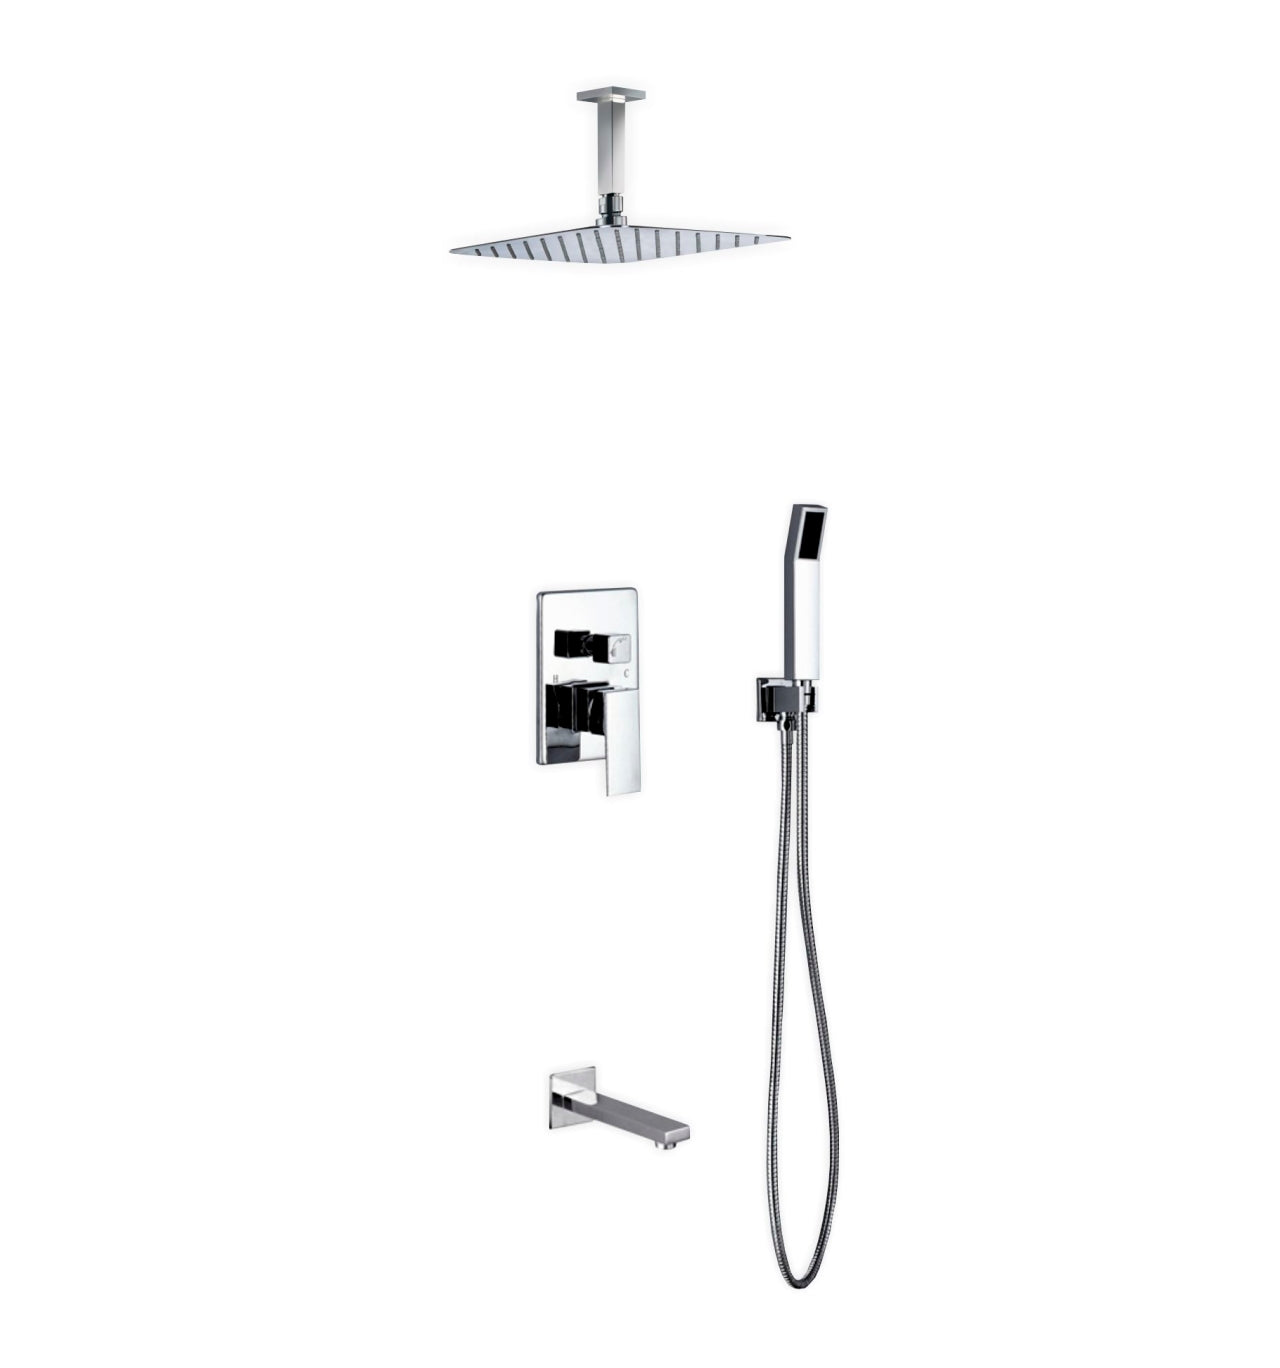 Aqua Piazza Brass Shower Set with Ceiling Mount Square Rain Shower, Handheld and Tub Filler - Home and Bath Depot